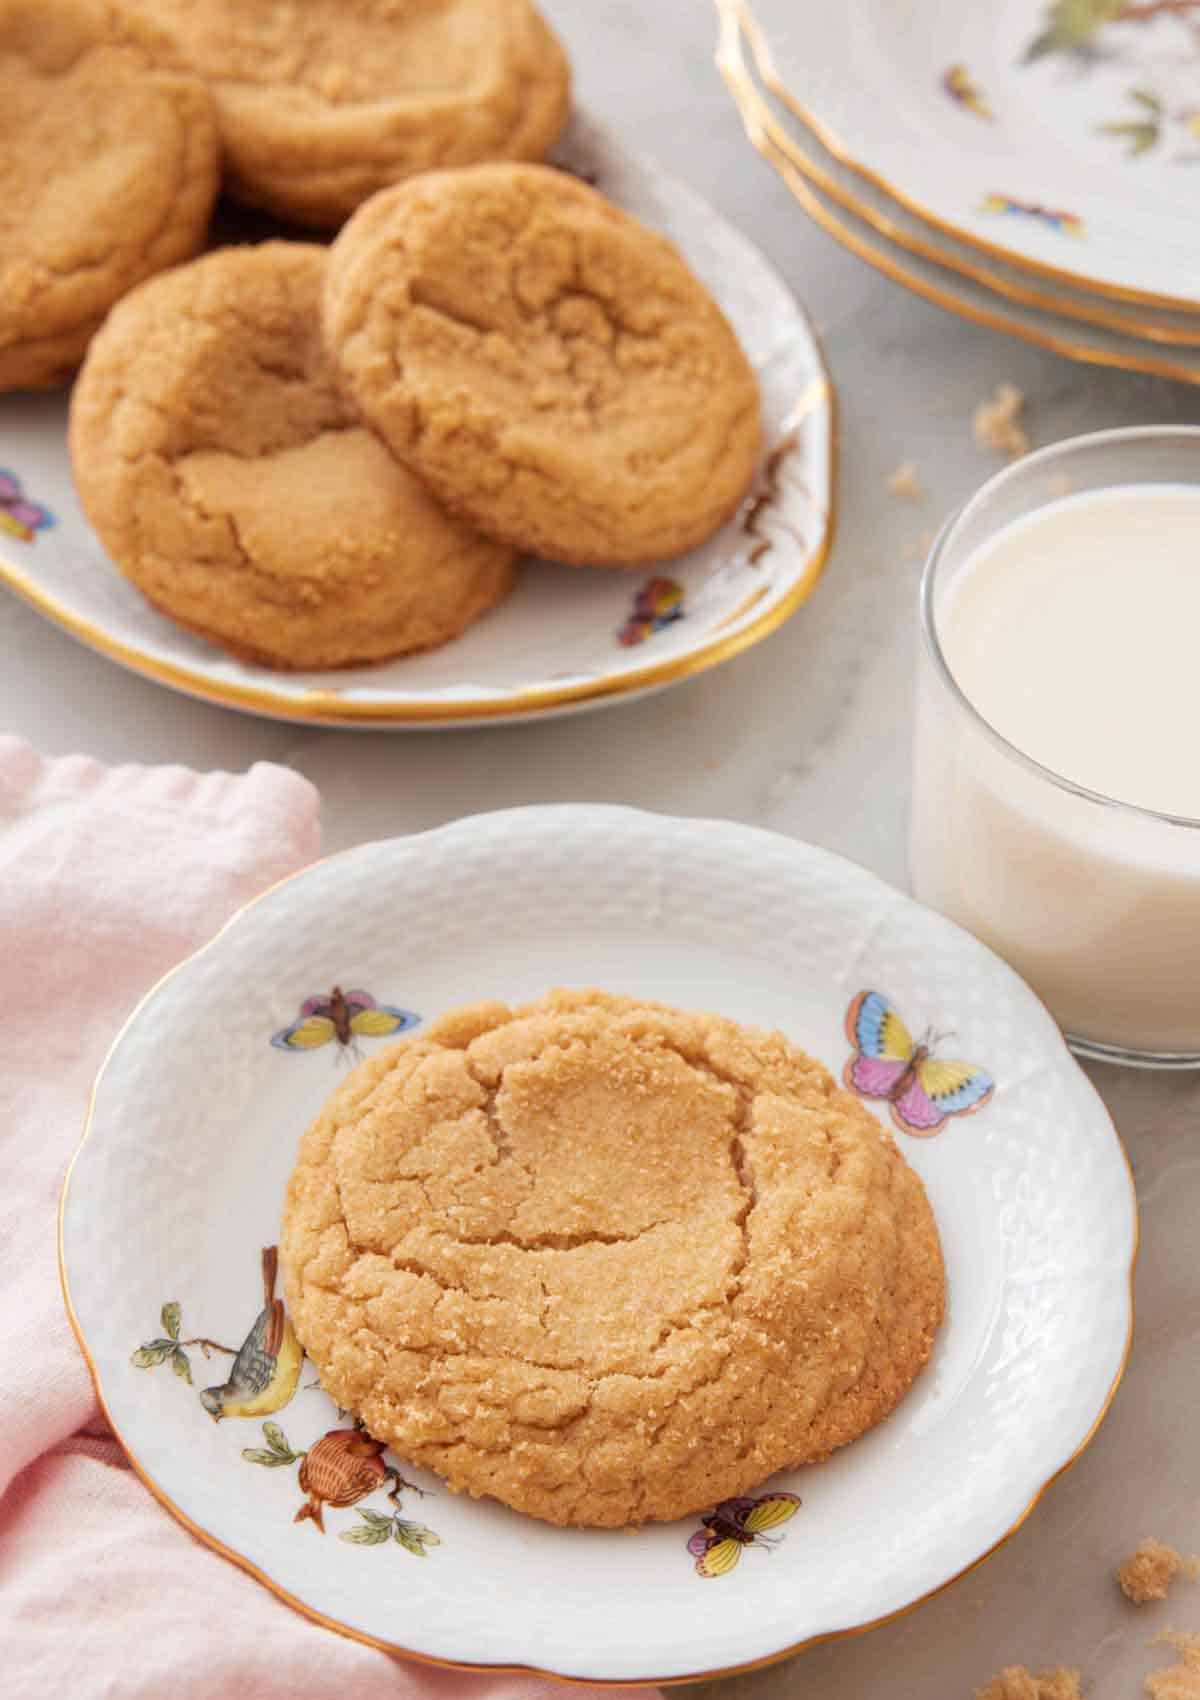 A plate with a brown sugar cookie with a platter with more cookies and a glass of milk behind it.